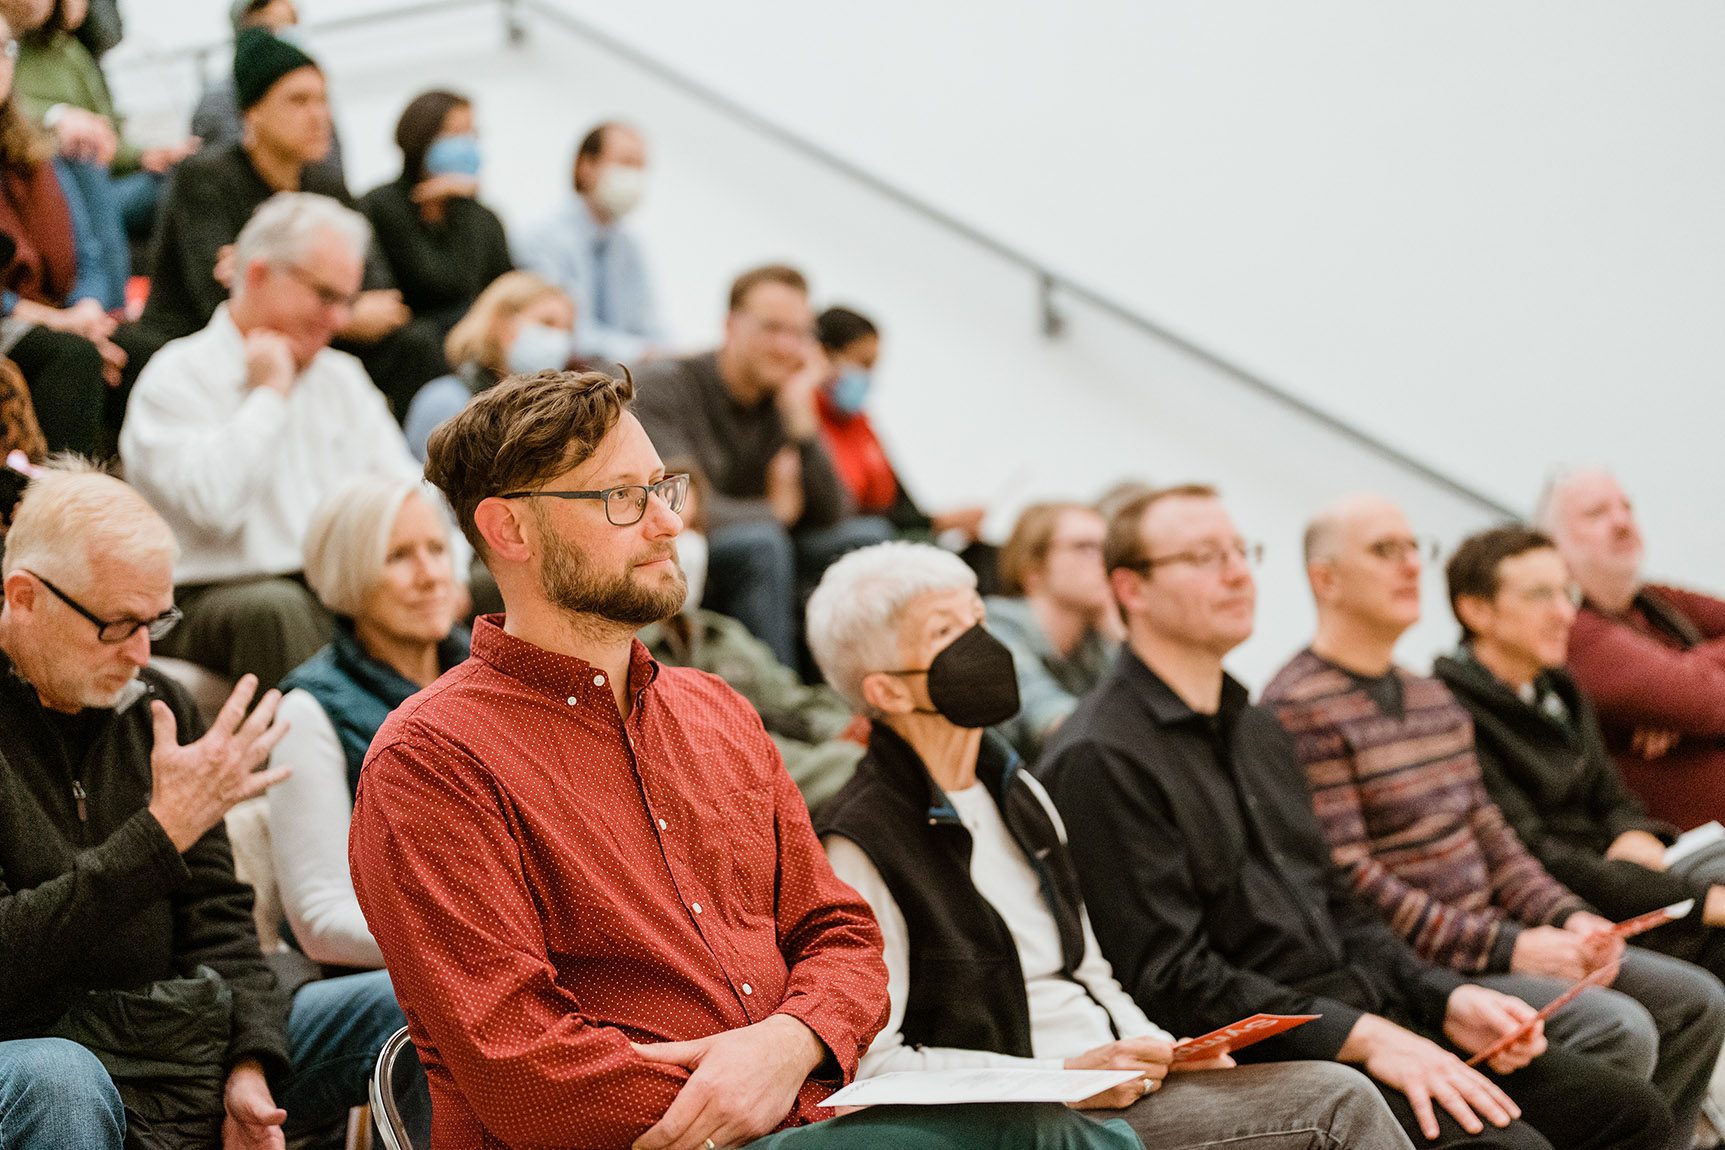 Audience watching a live musical performance at the Pulitzer Arts Foundation